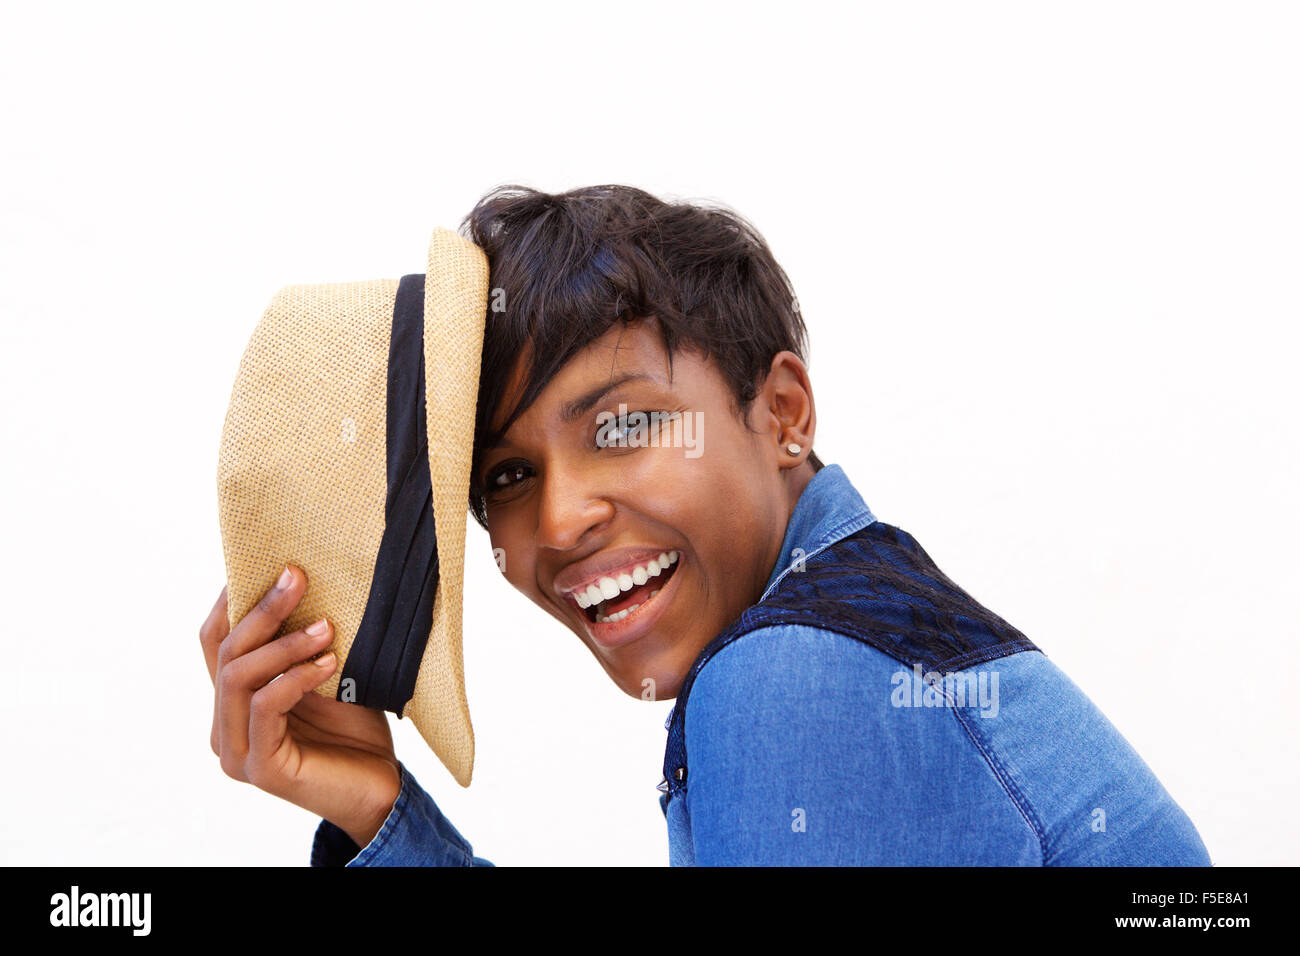 Close up portrait of an african american fashion model smiling with hat Stock Photo